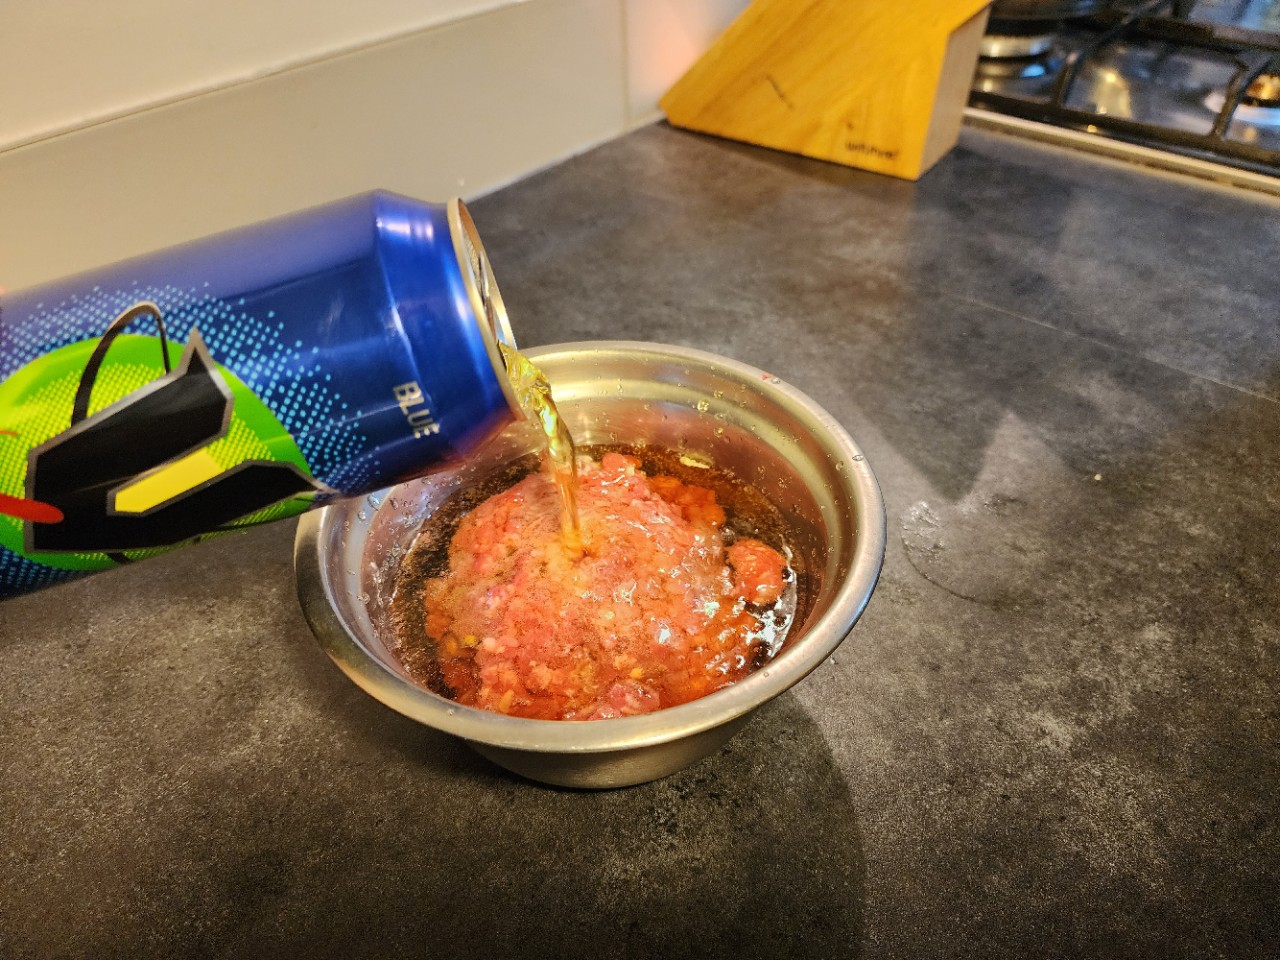 Kiwi lad invents 'absolutely cursed' Blue V-infused mince and cheese pie, revolutionises smoko